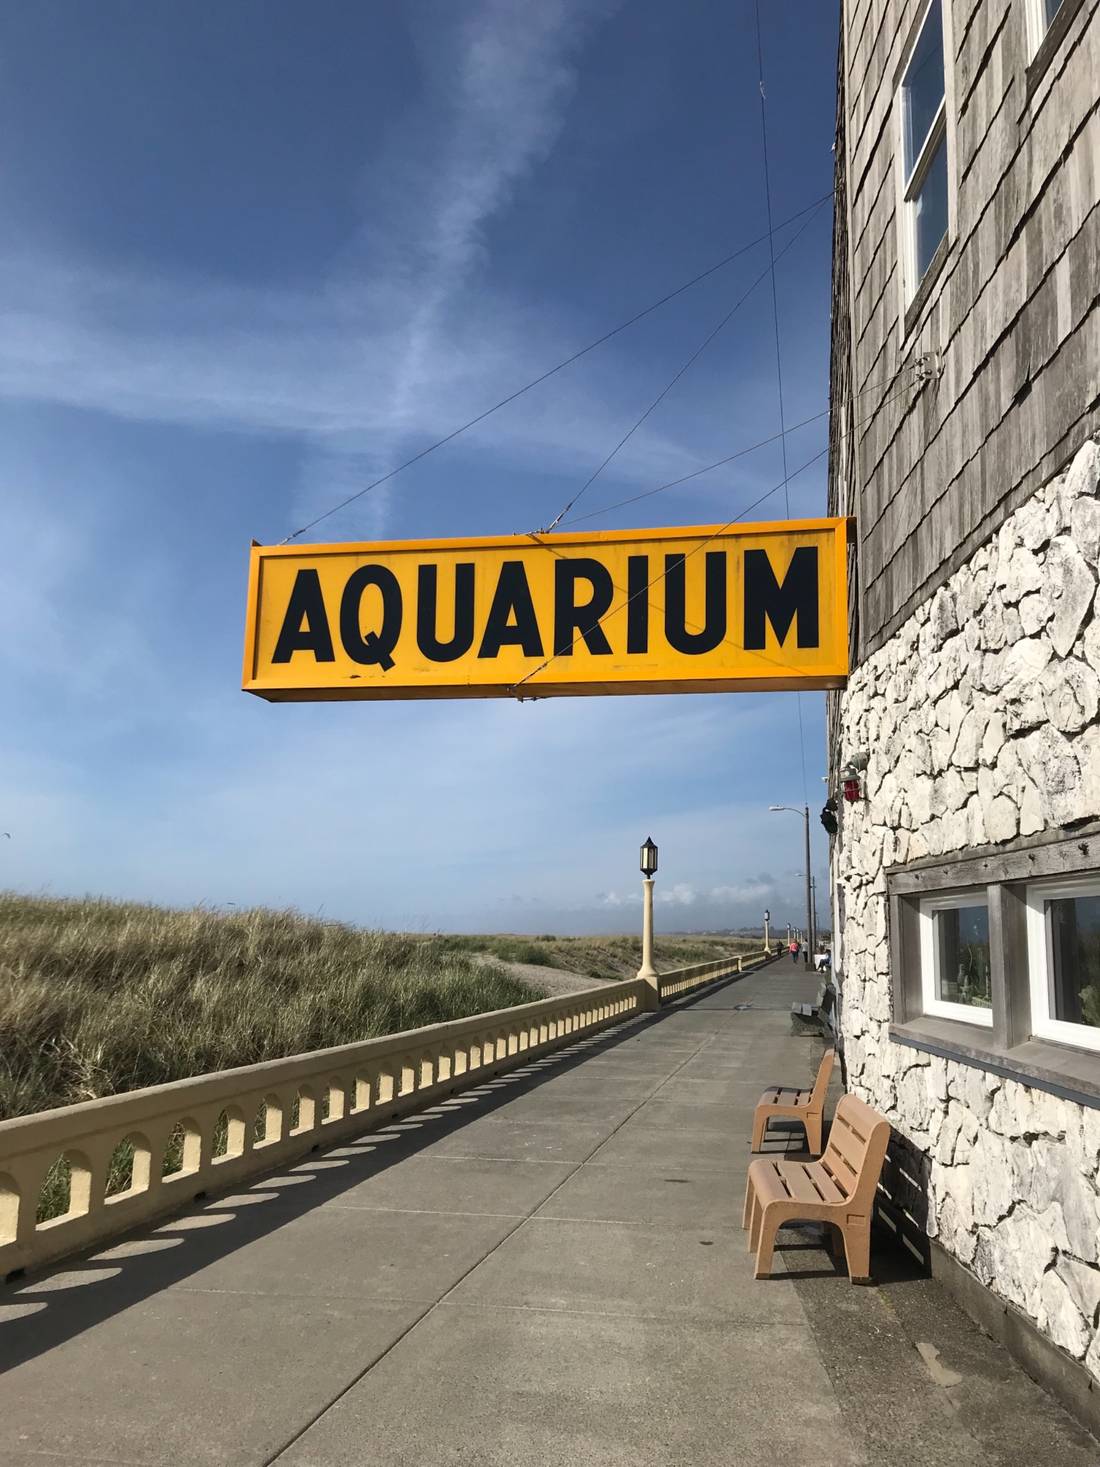 Walking past the aquarium on the Seaside Promenade. The “Prom” is 15 feet wide and 1.5 miles long. The path is the border between the town and beach and runs parallel to the Pacific Ocean. It is a fabulous place for a stroll.